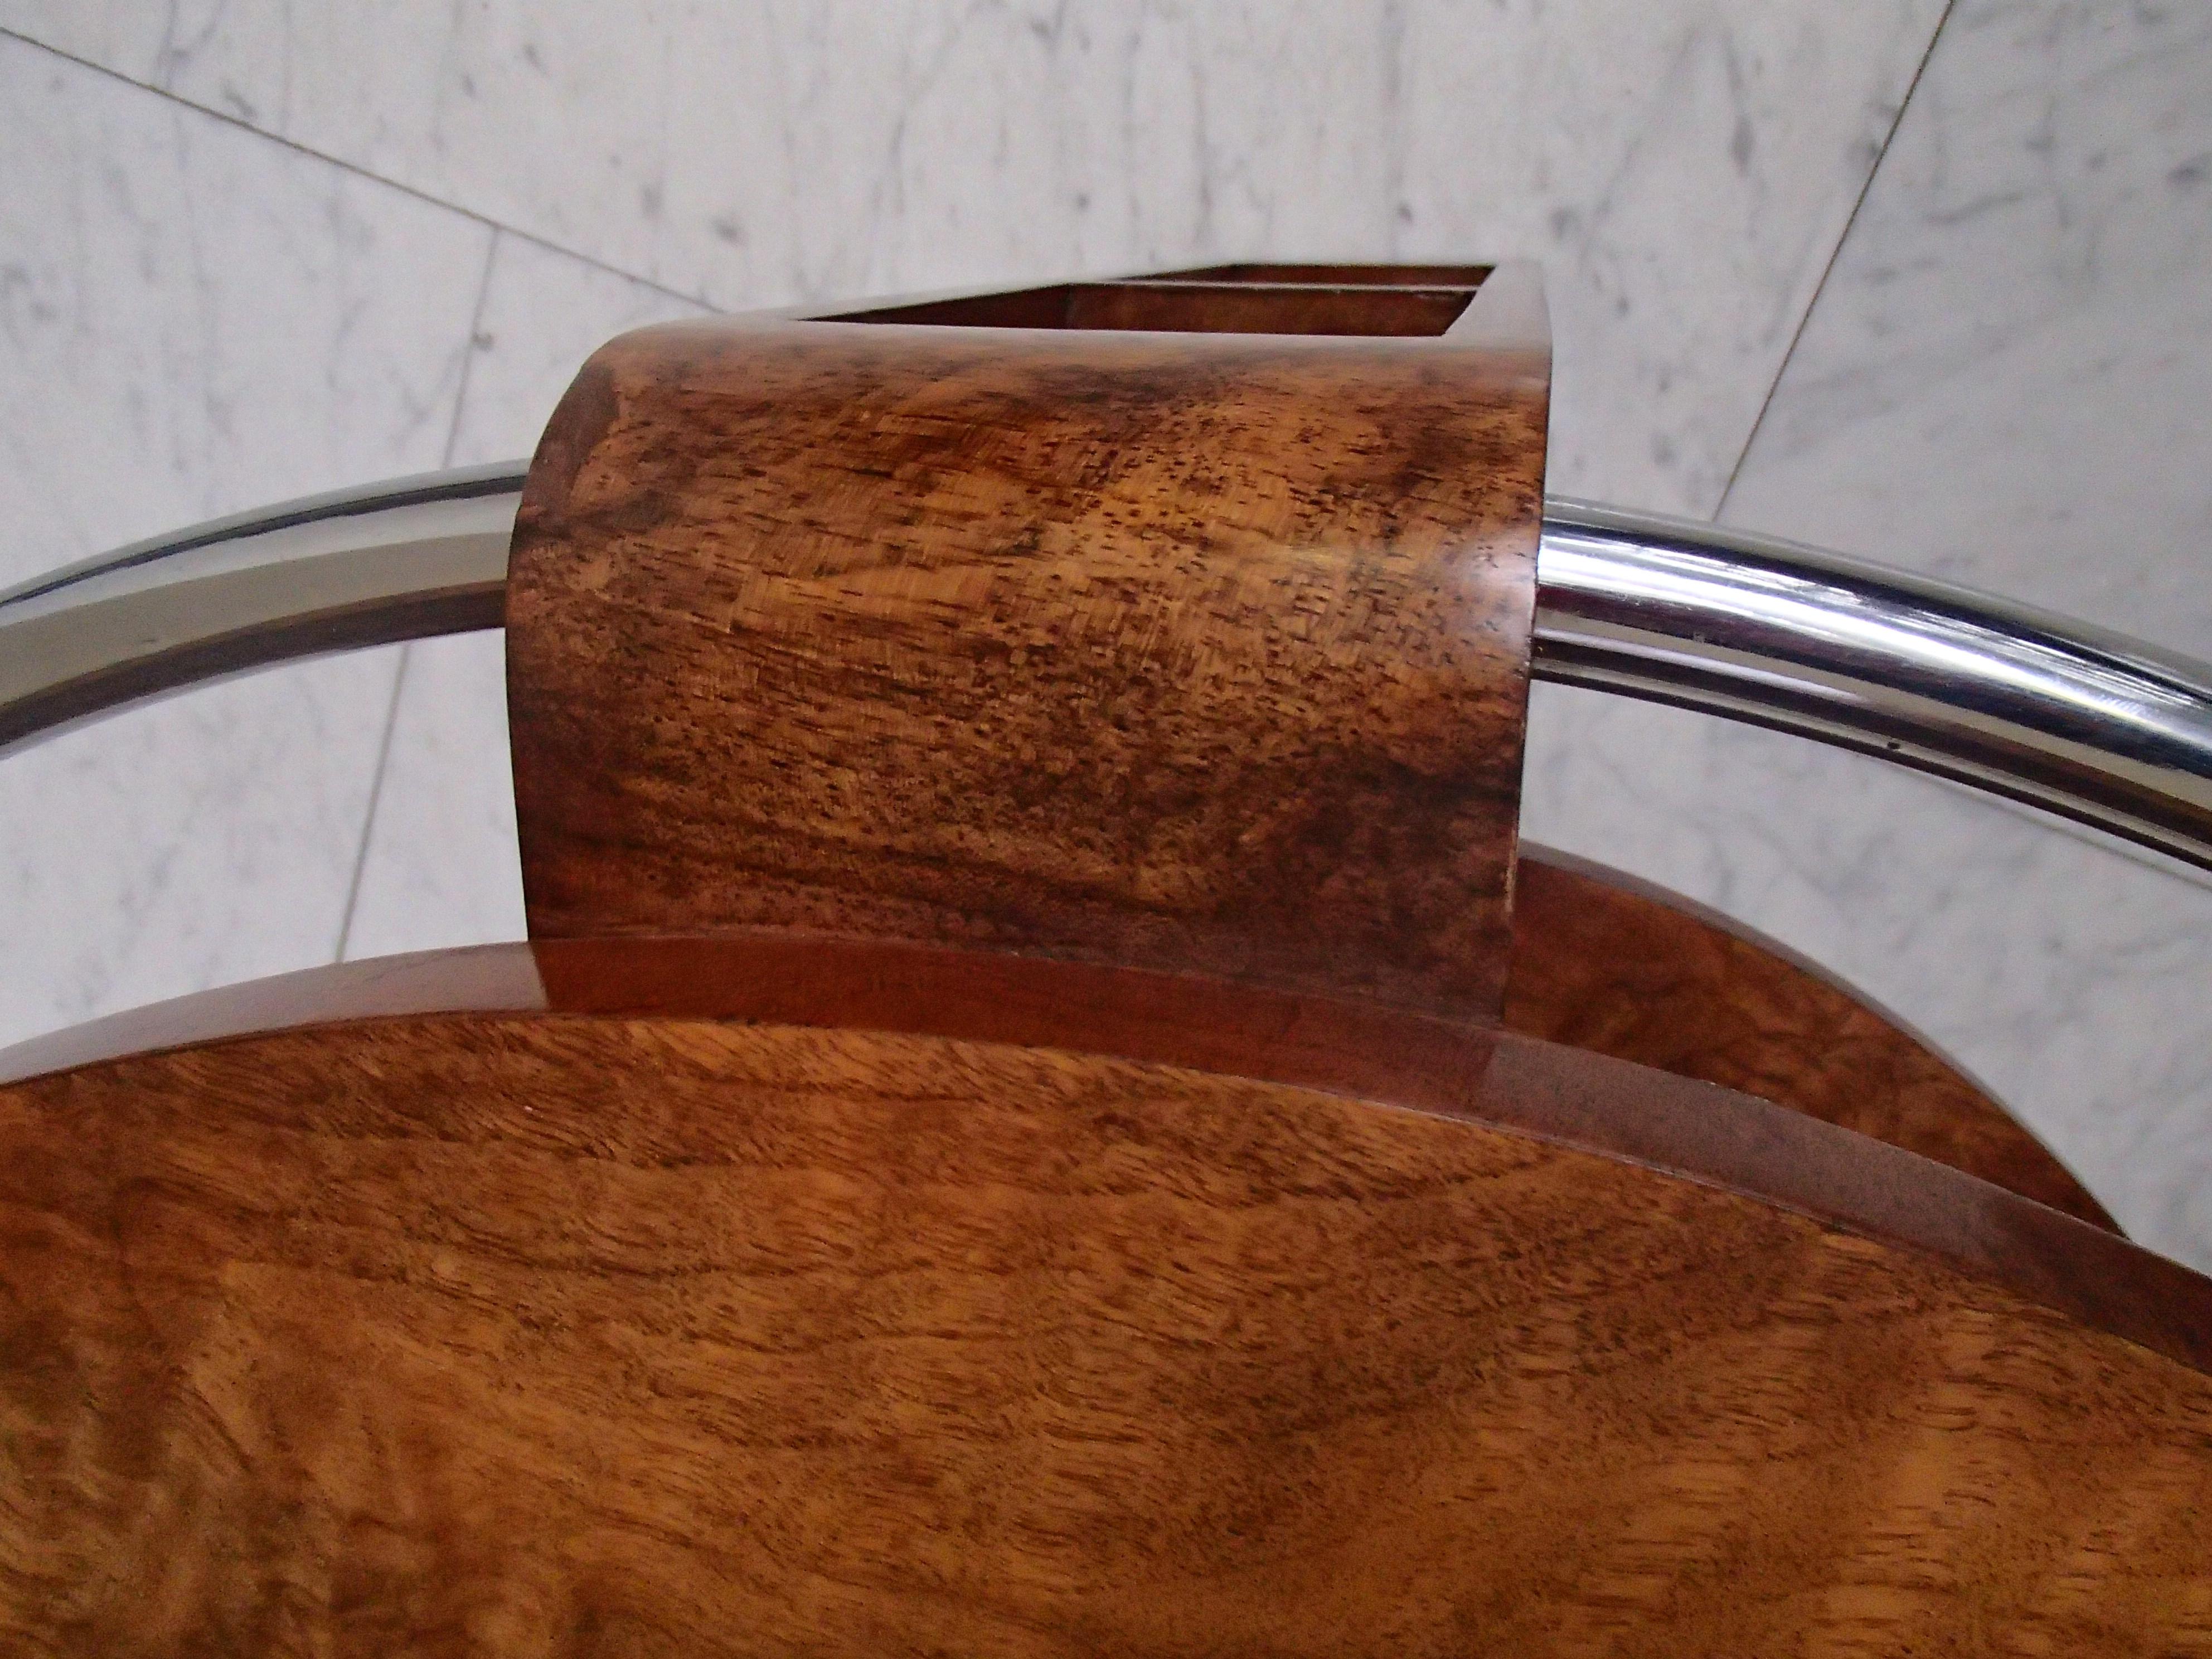 Art Deco Coffee or Sofa Table Walnut with Chrome Ring and Shelf's in the Legs 2